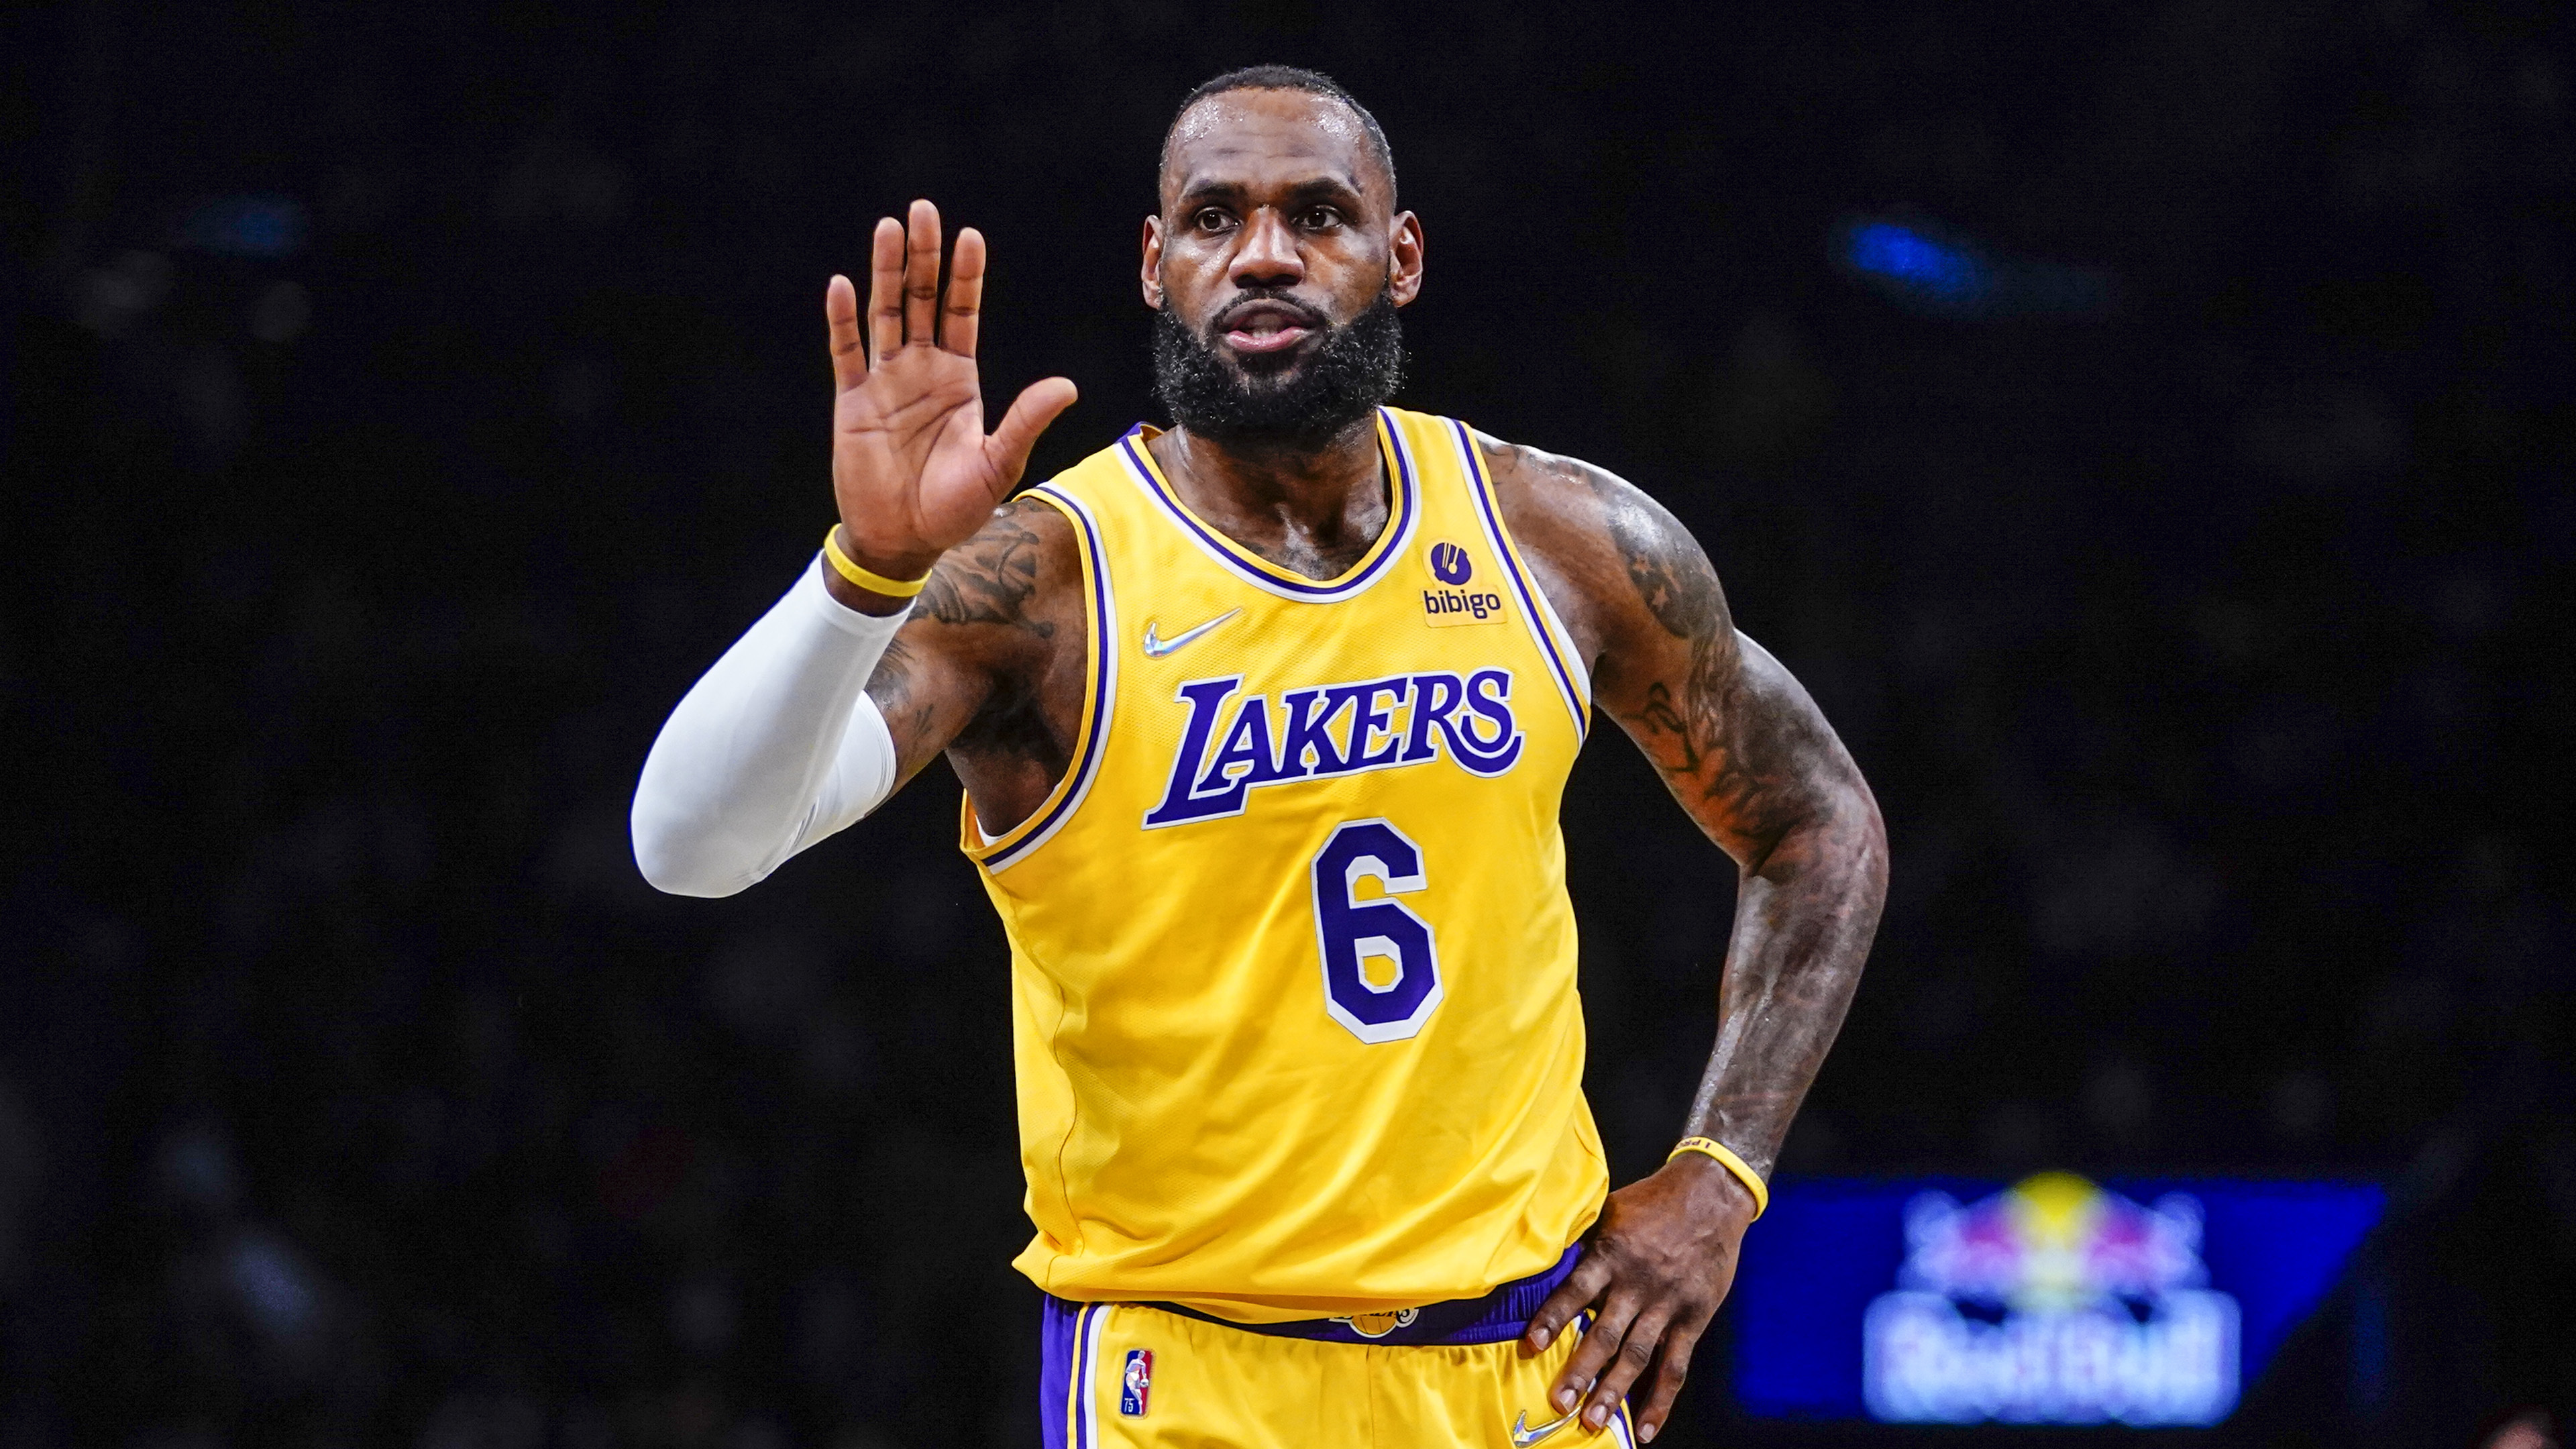 NBA All-Star Game 2022 Rosters: Captains and Starters Revealed for Draft Format - Bleacher Report : The starters for the 2022 NBA All-Star Game have been announced, led by captains LeBron James and Kevin Durant for the second consecutive year.&nbsp; James was...  | Tranquility 國際社群